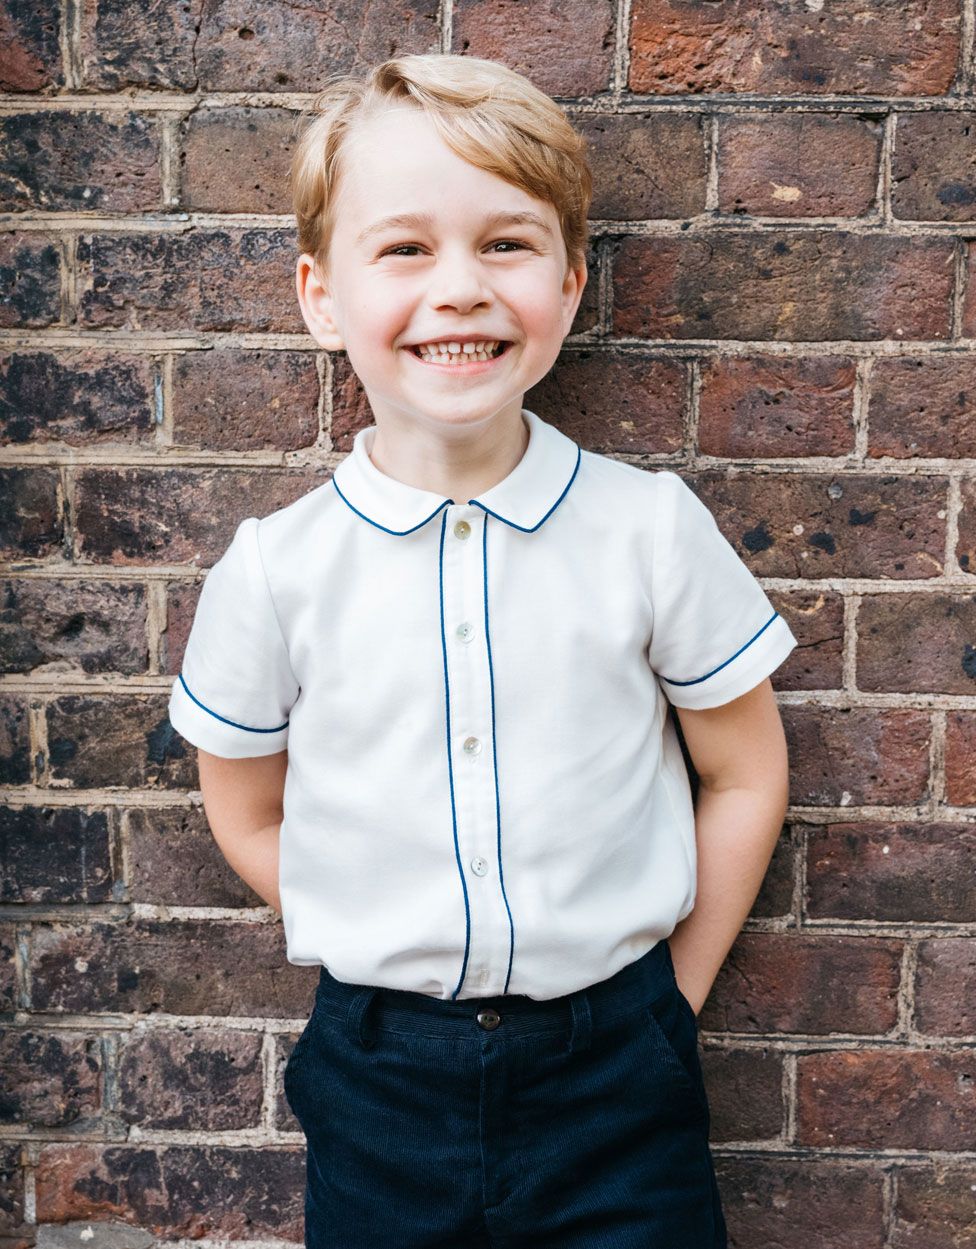 Prince George in his official fifth birthday portrait